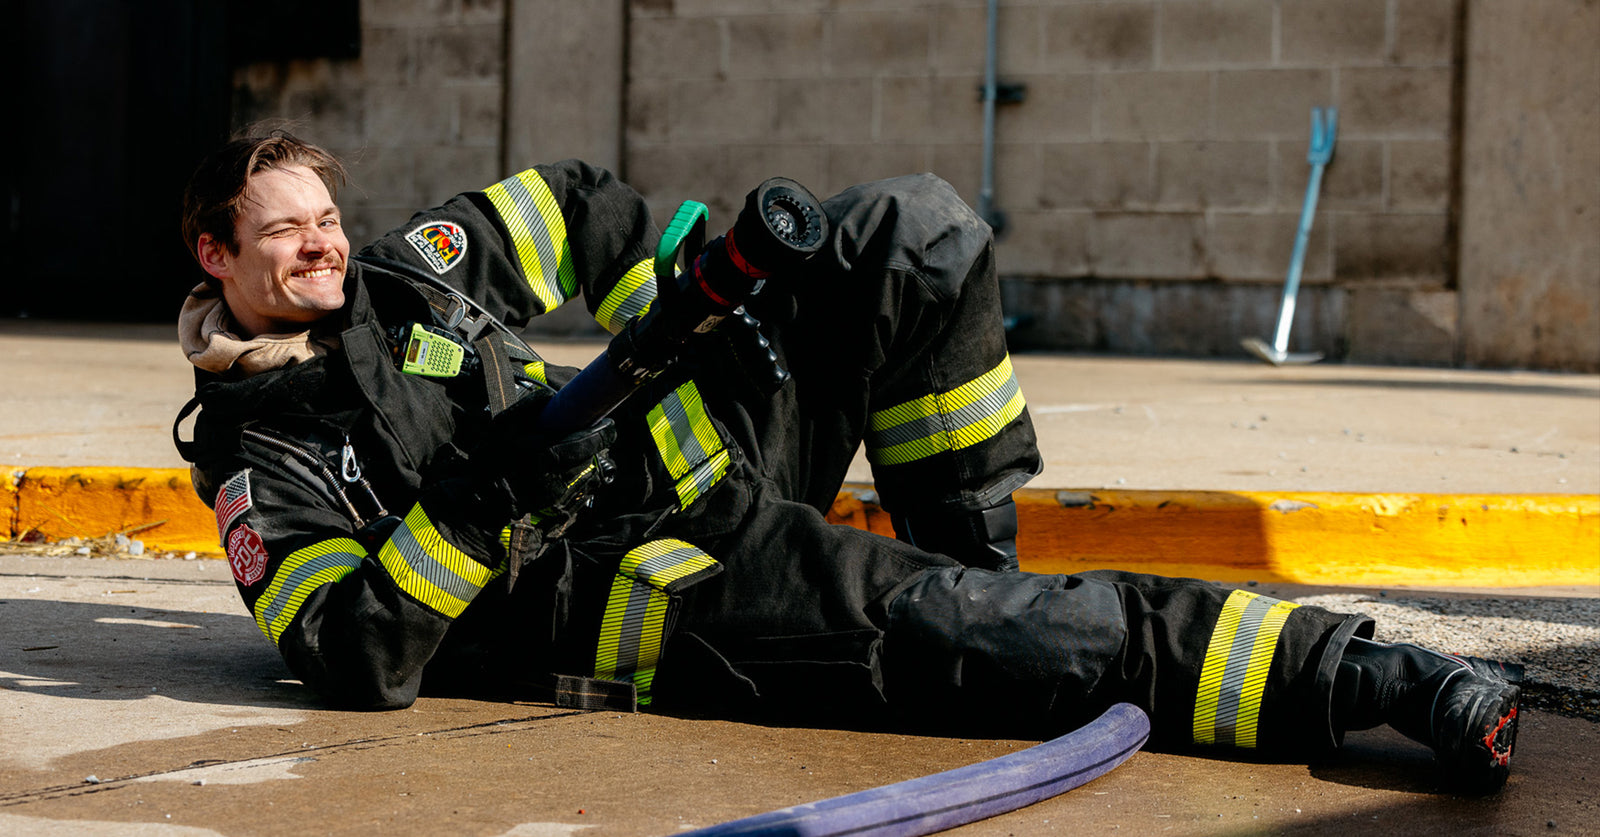 Firefighter on the ground posing with a fire hose.